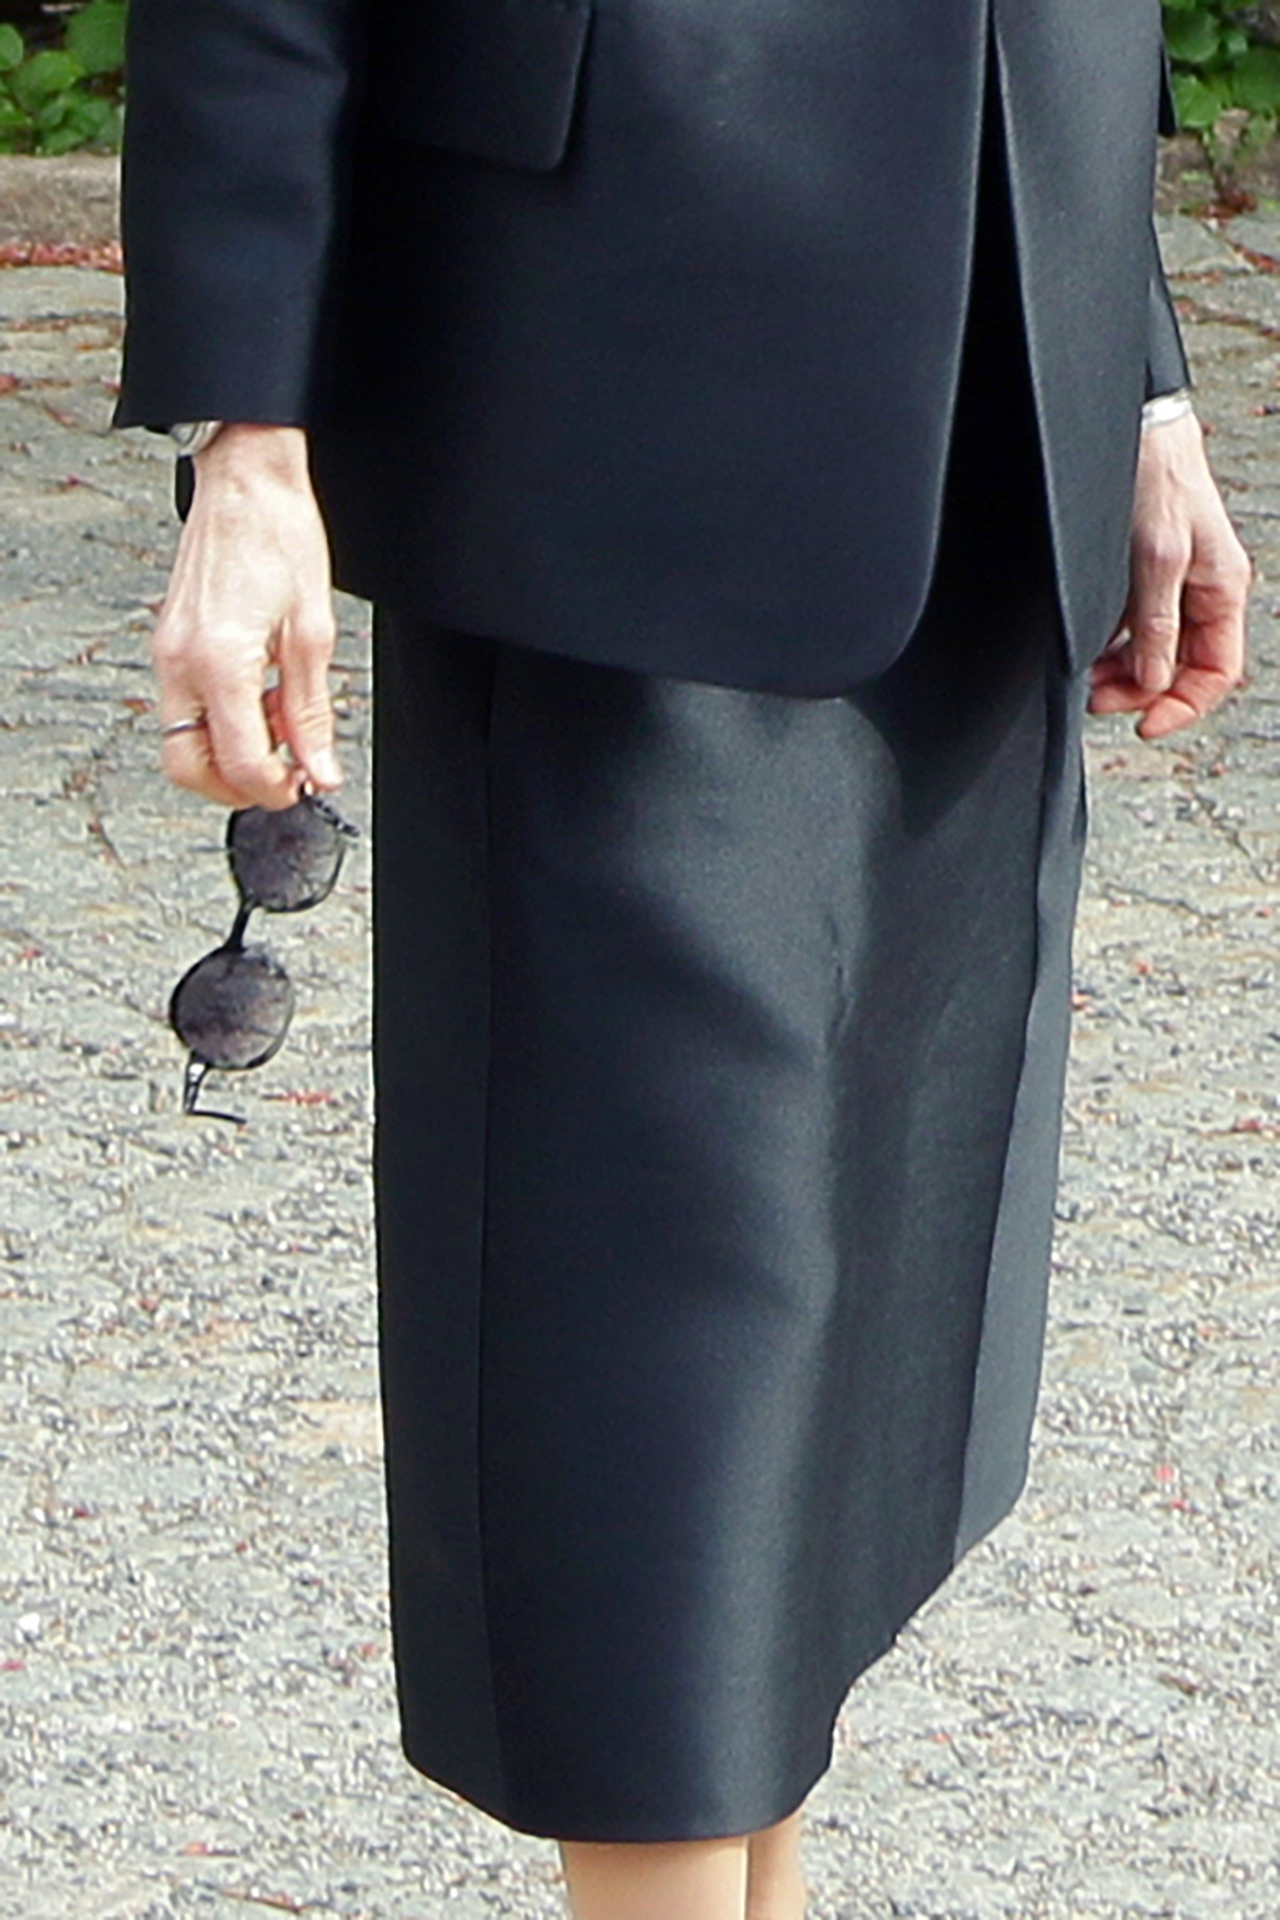 woman holding sunglasses wearing all black